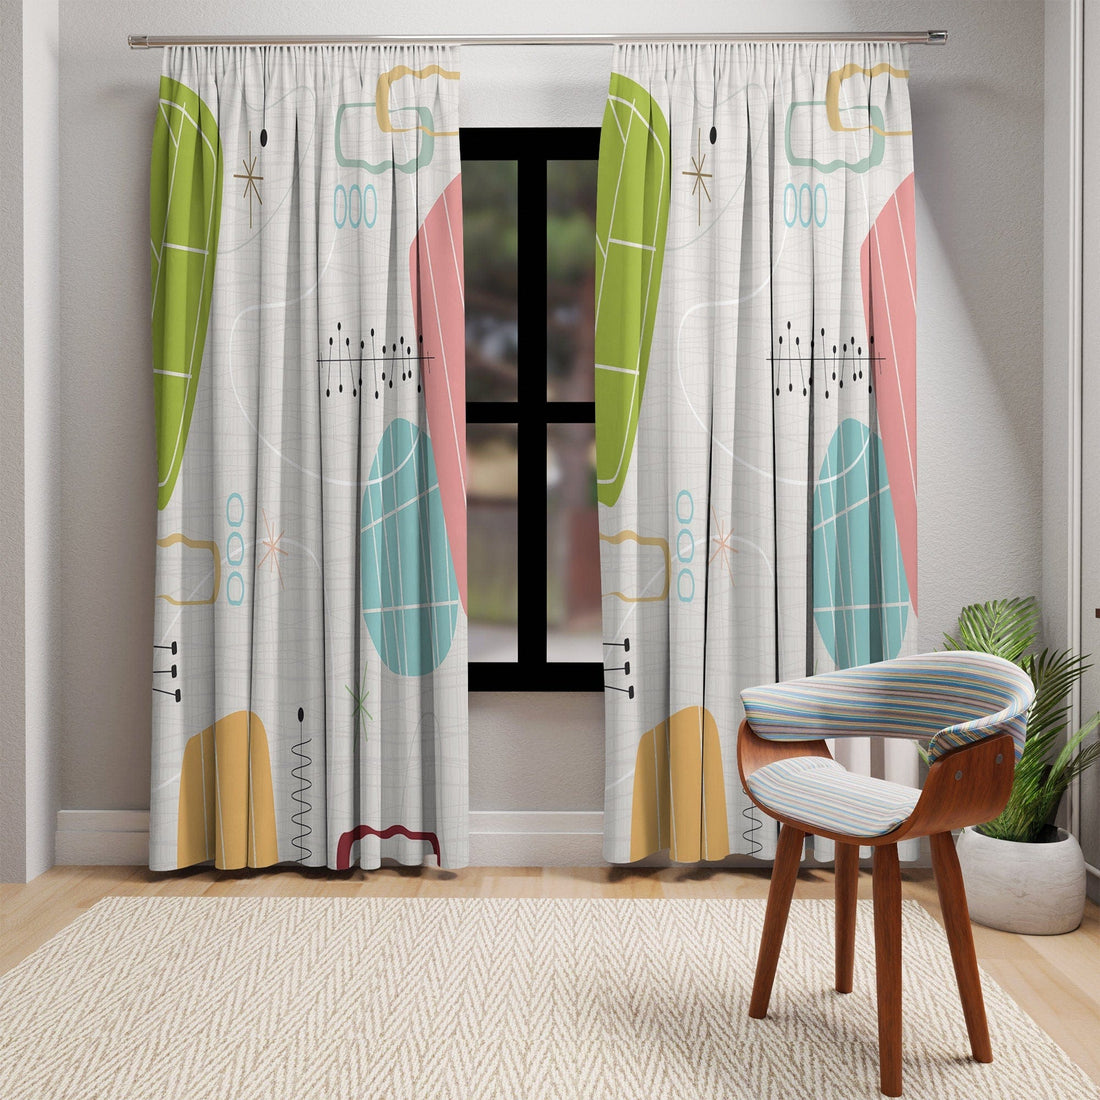 Kate McEnroe New York 1950s Mid Century Modern Abstract Window Curtains in Retro Teal, Lime Green, Coral, Light GrayWindow CurtainsW3D - BRK - CLT - SH7